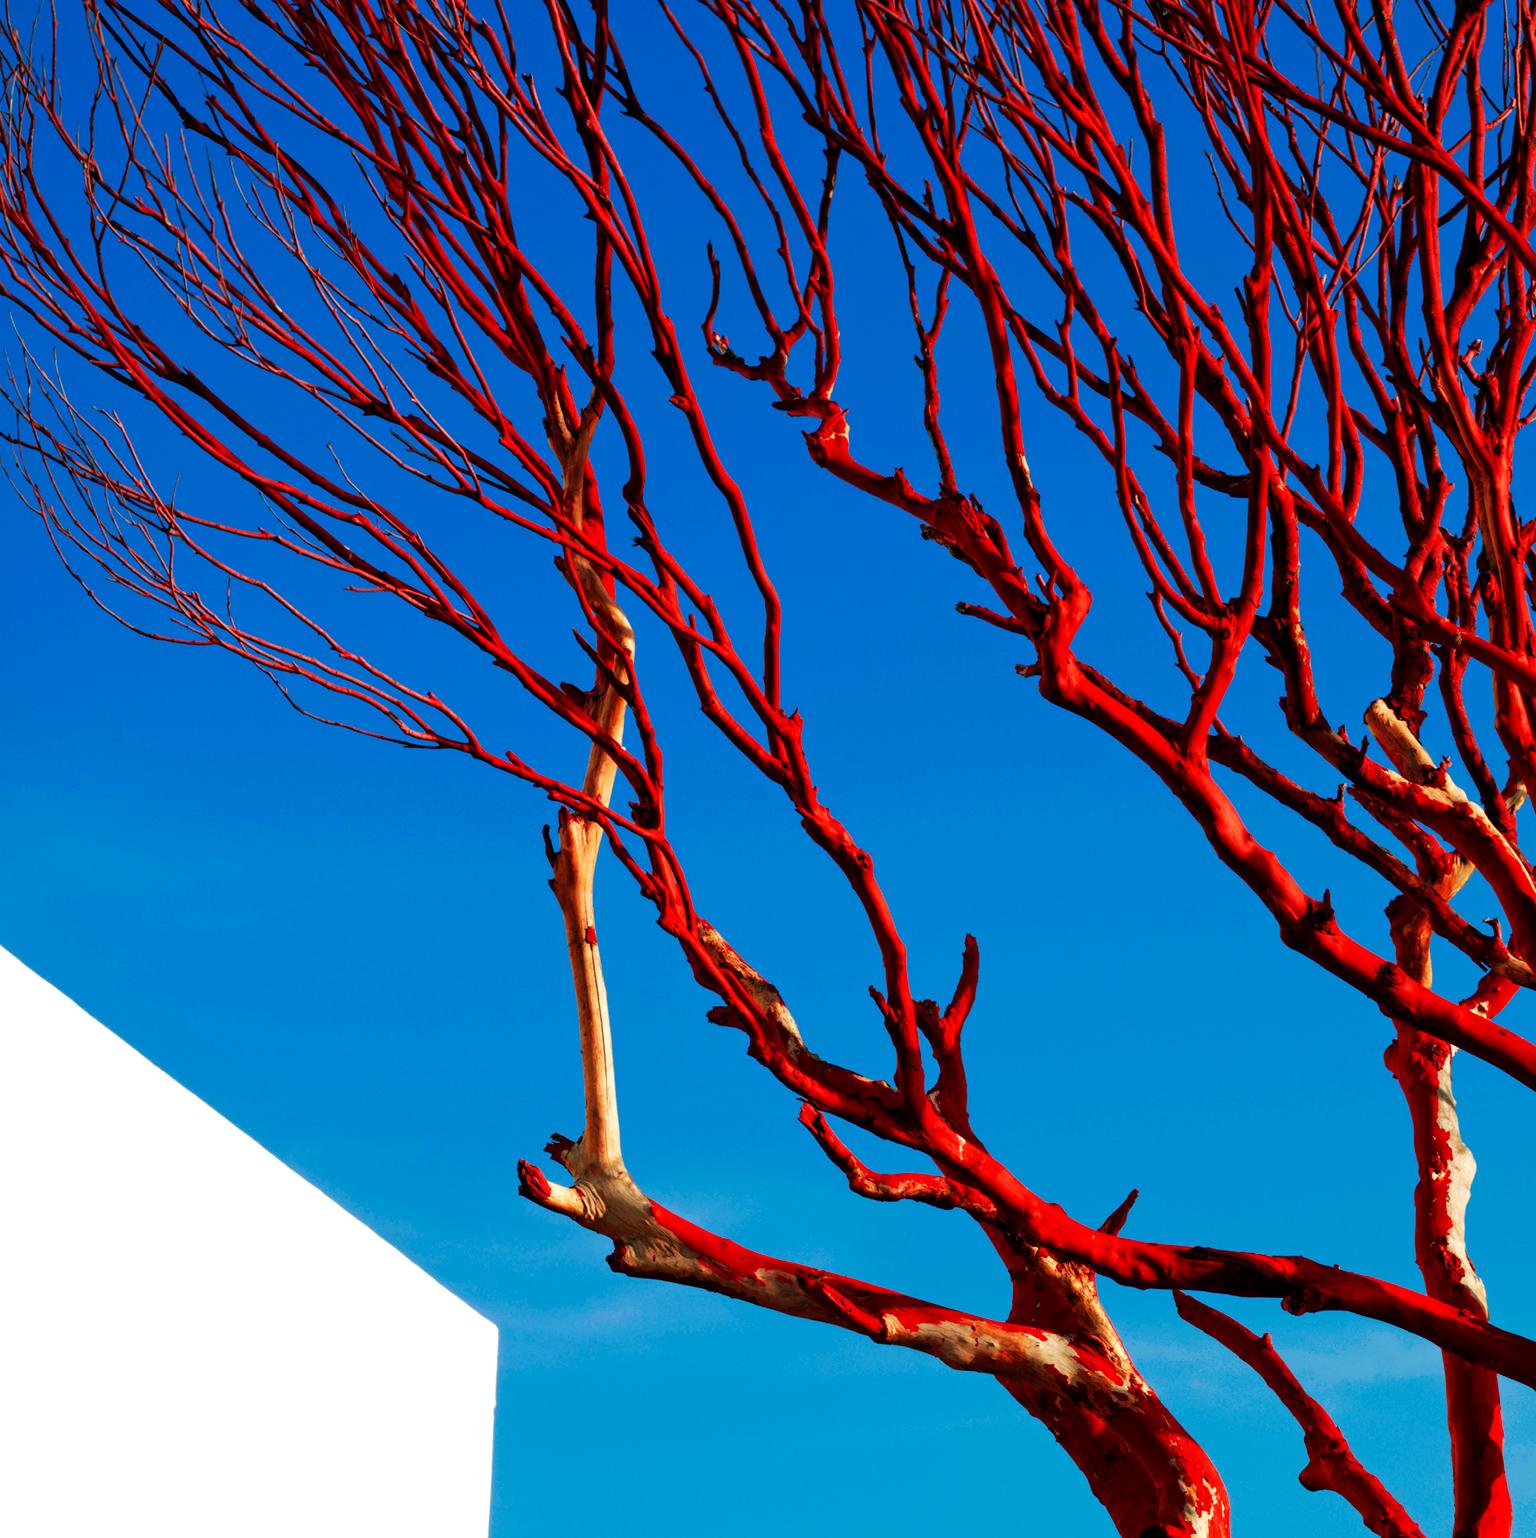 Red Tree, Akumal, Mexico, 2007.
Photograph by Cosmo Condina of a red tree against a blue sky with modern architecture in Akurnal, Mexico.
 Archival Pigment Print, 18” X 13.6”, Edition of 10. This is #3/10 in the edition.
 
A modern graphic version